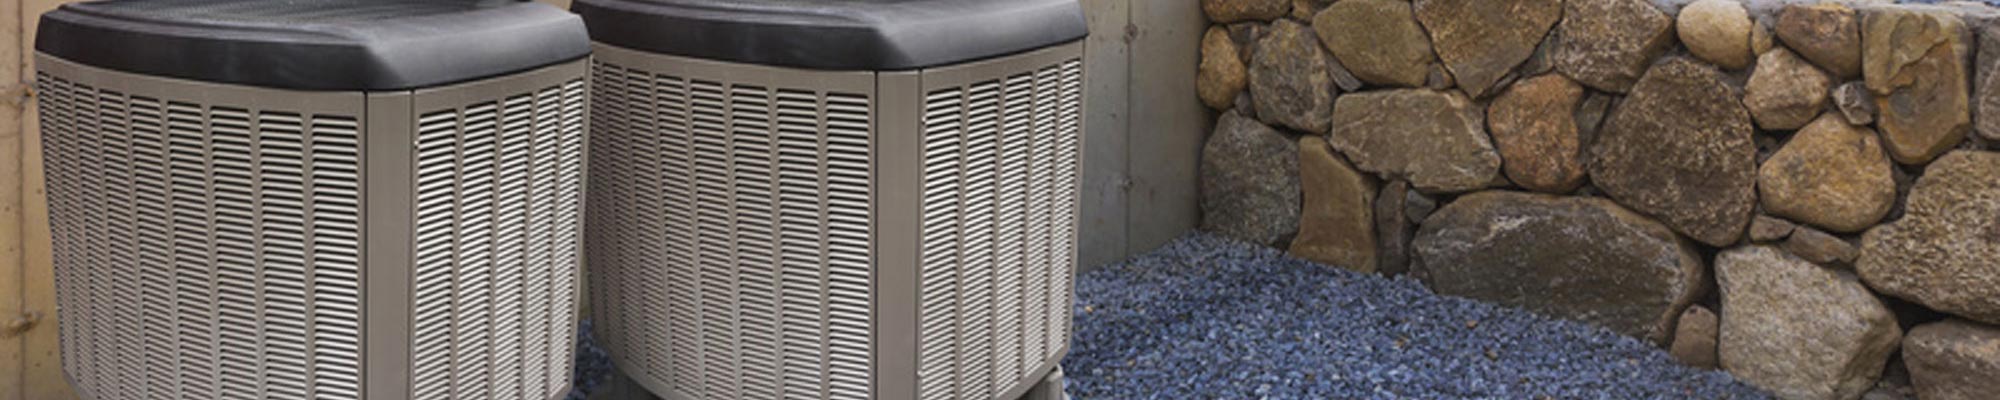 AC Units provided by Dandy Don's Heating & Air Conditioning